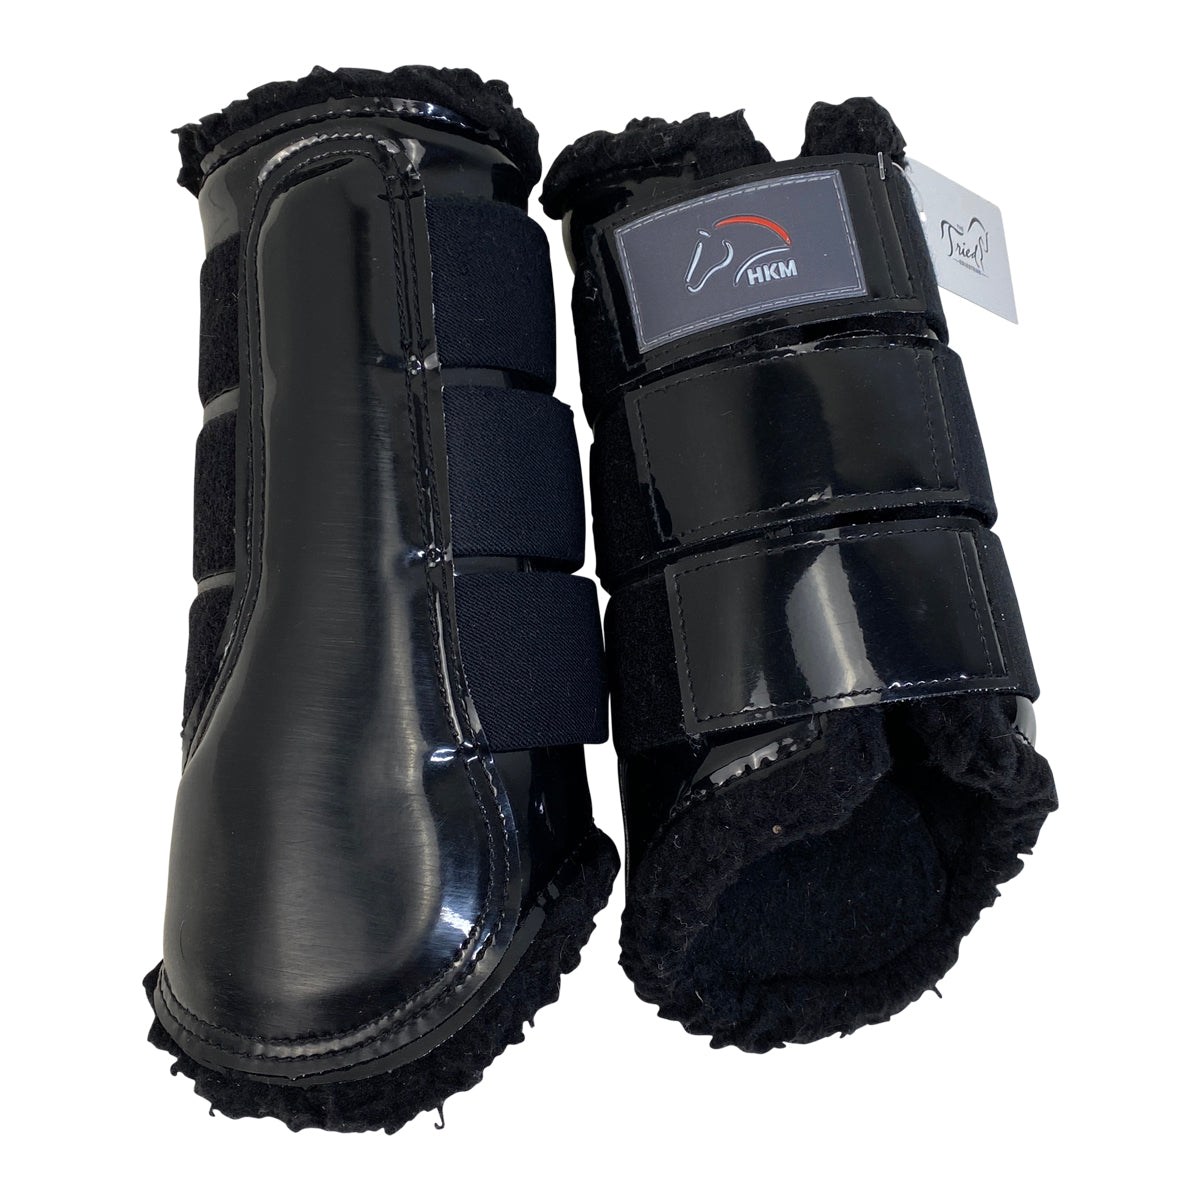 HKM Gloss Protection Boots in Black